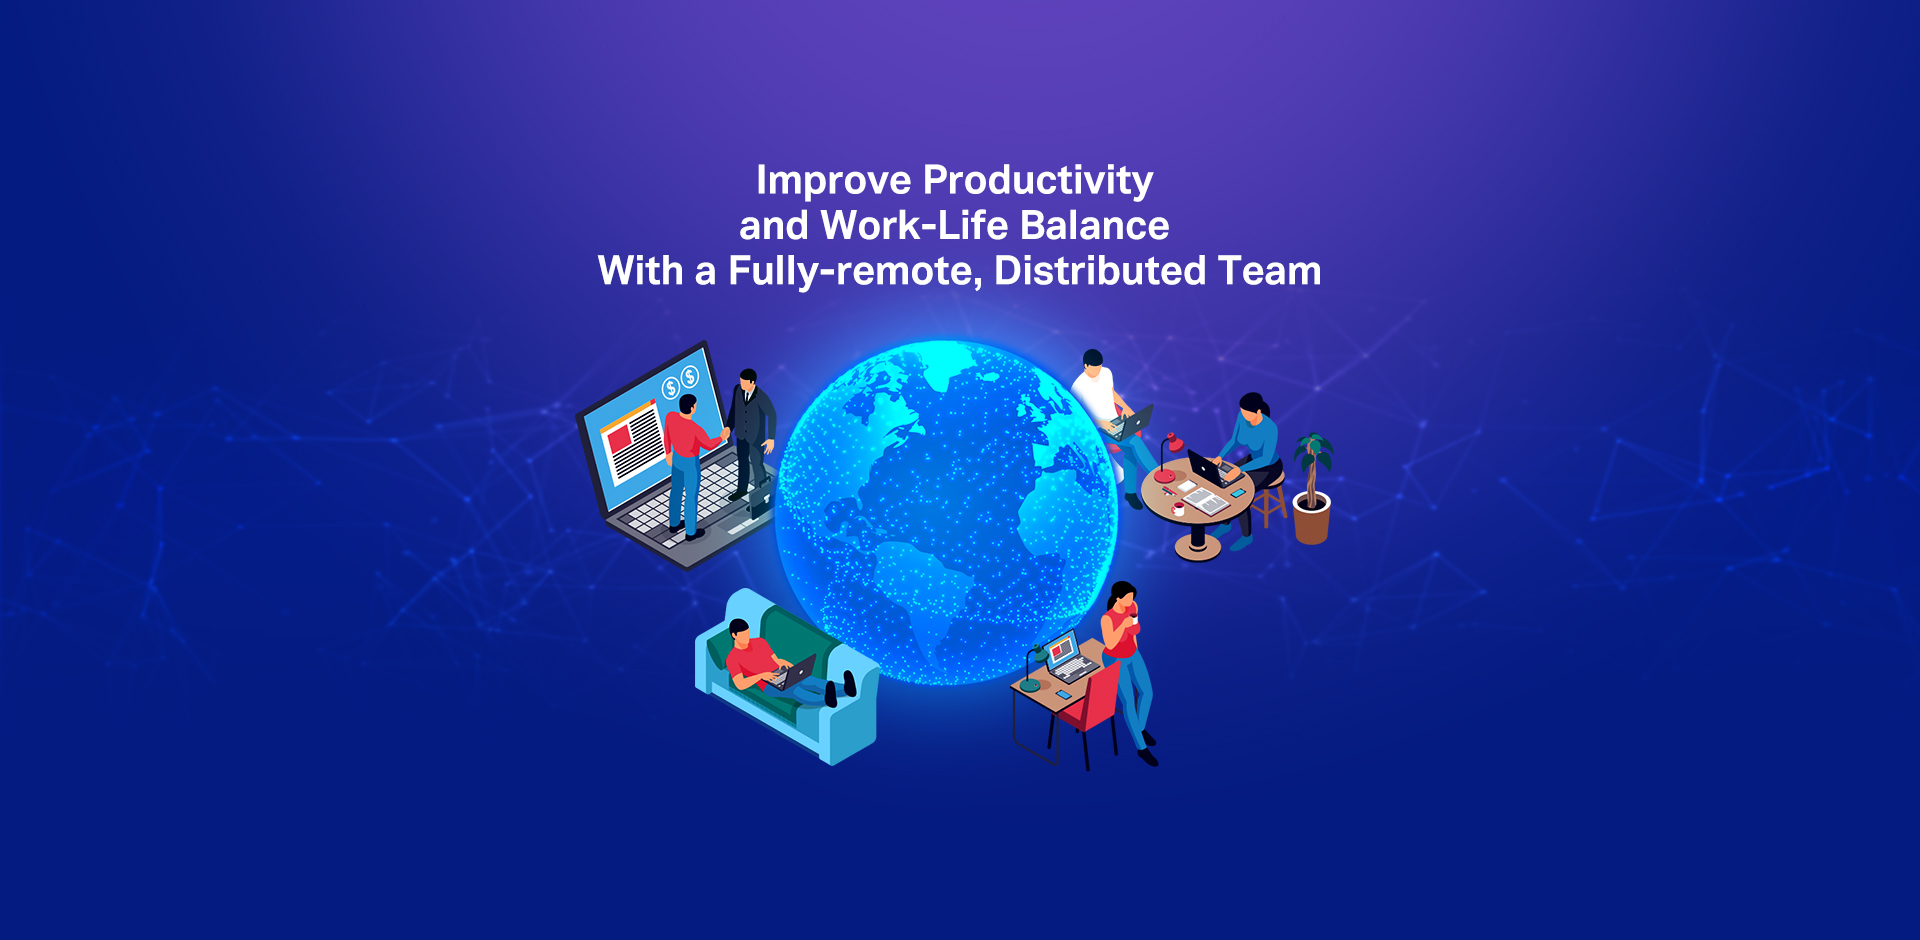 Improve productivity and work-life balance with a fully-remote, distributed team